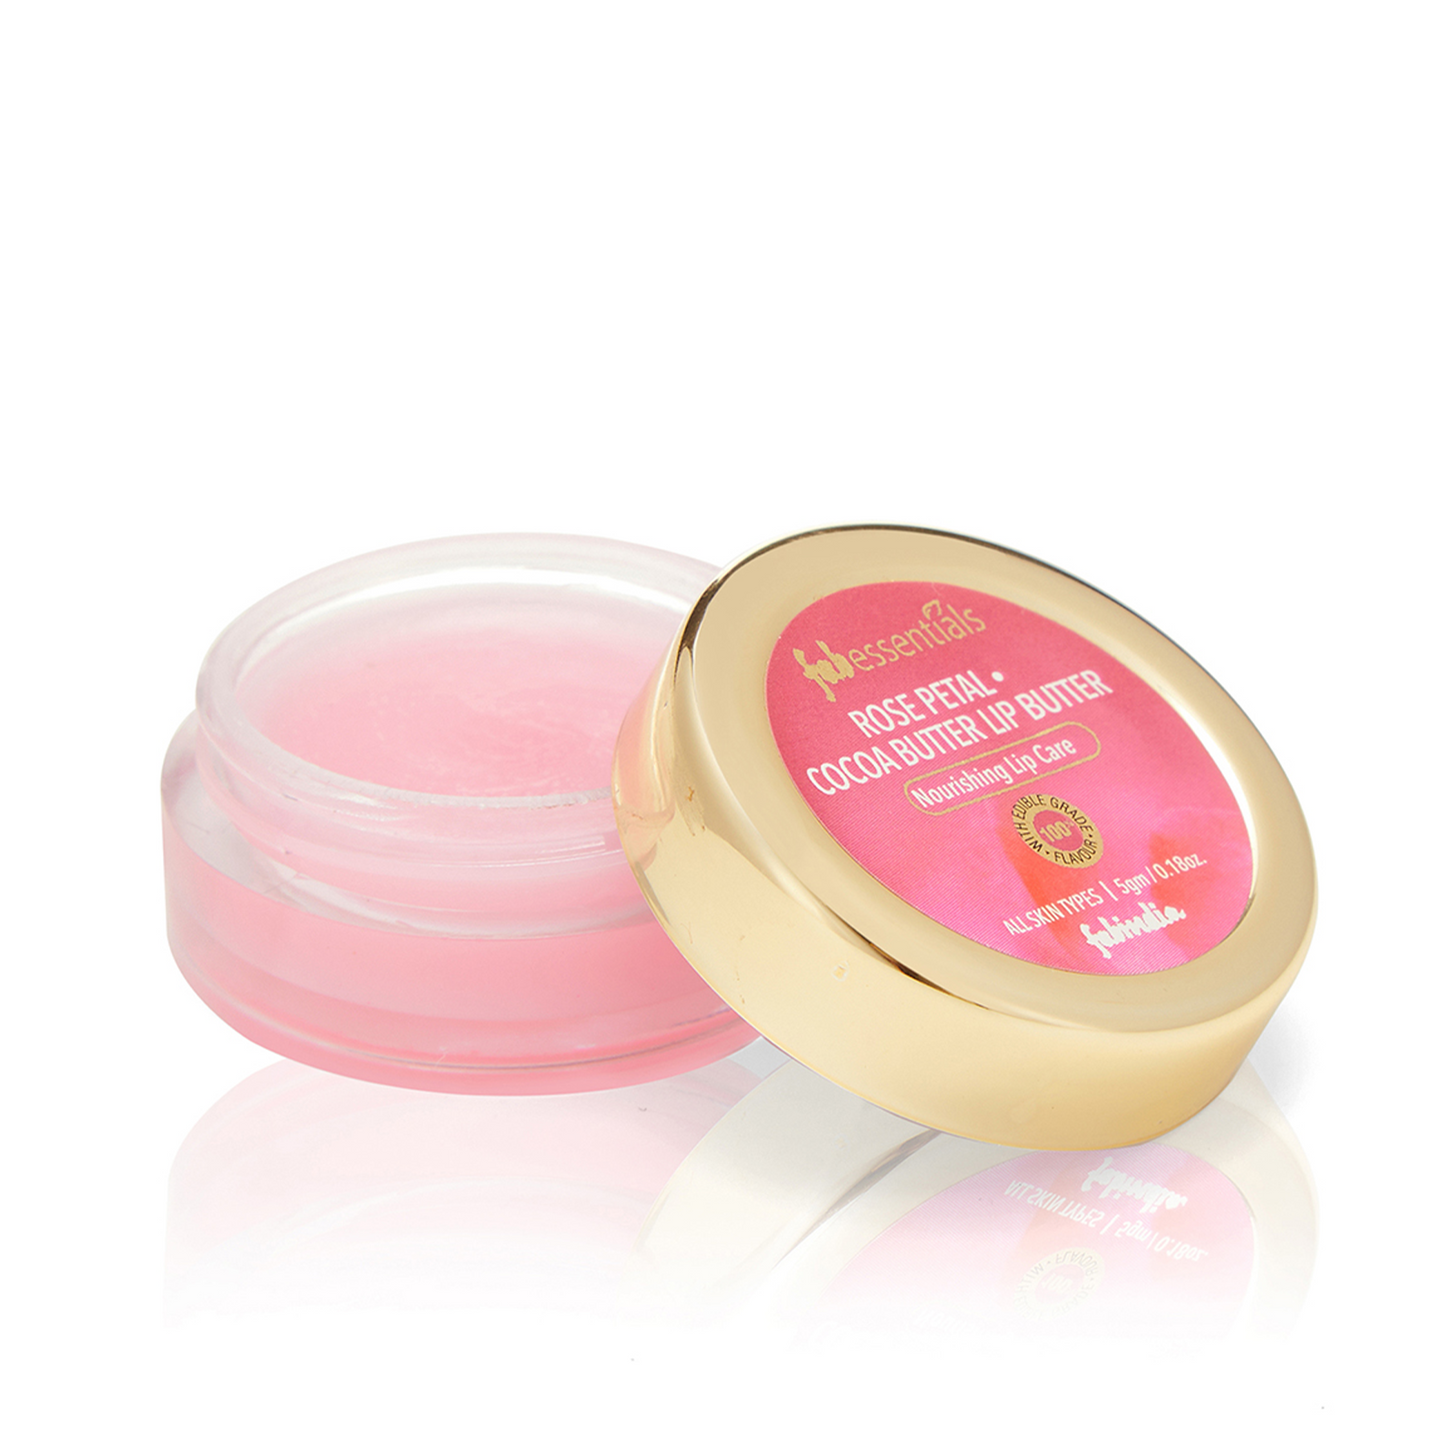 Fabessentials Rose Petal Cocoa Butter Lip Butter infused with Coconut Oil & Shea Butter, 5gm